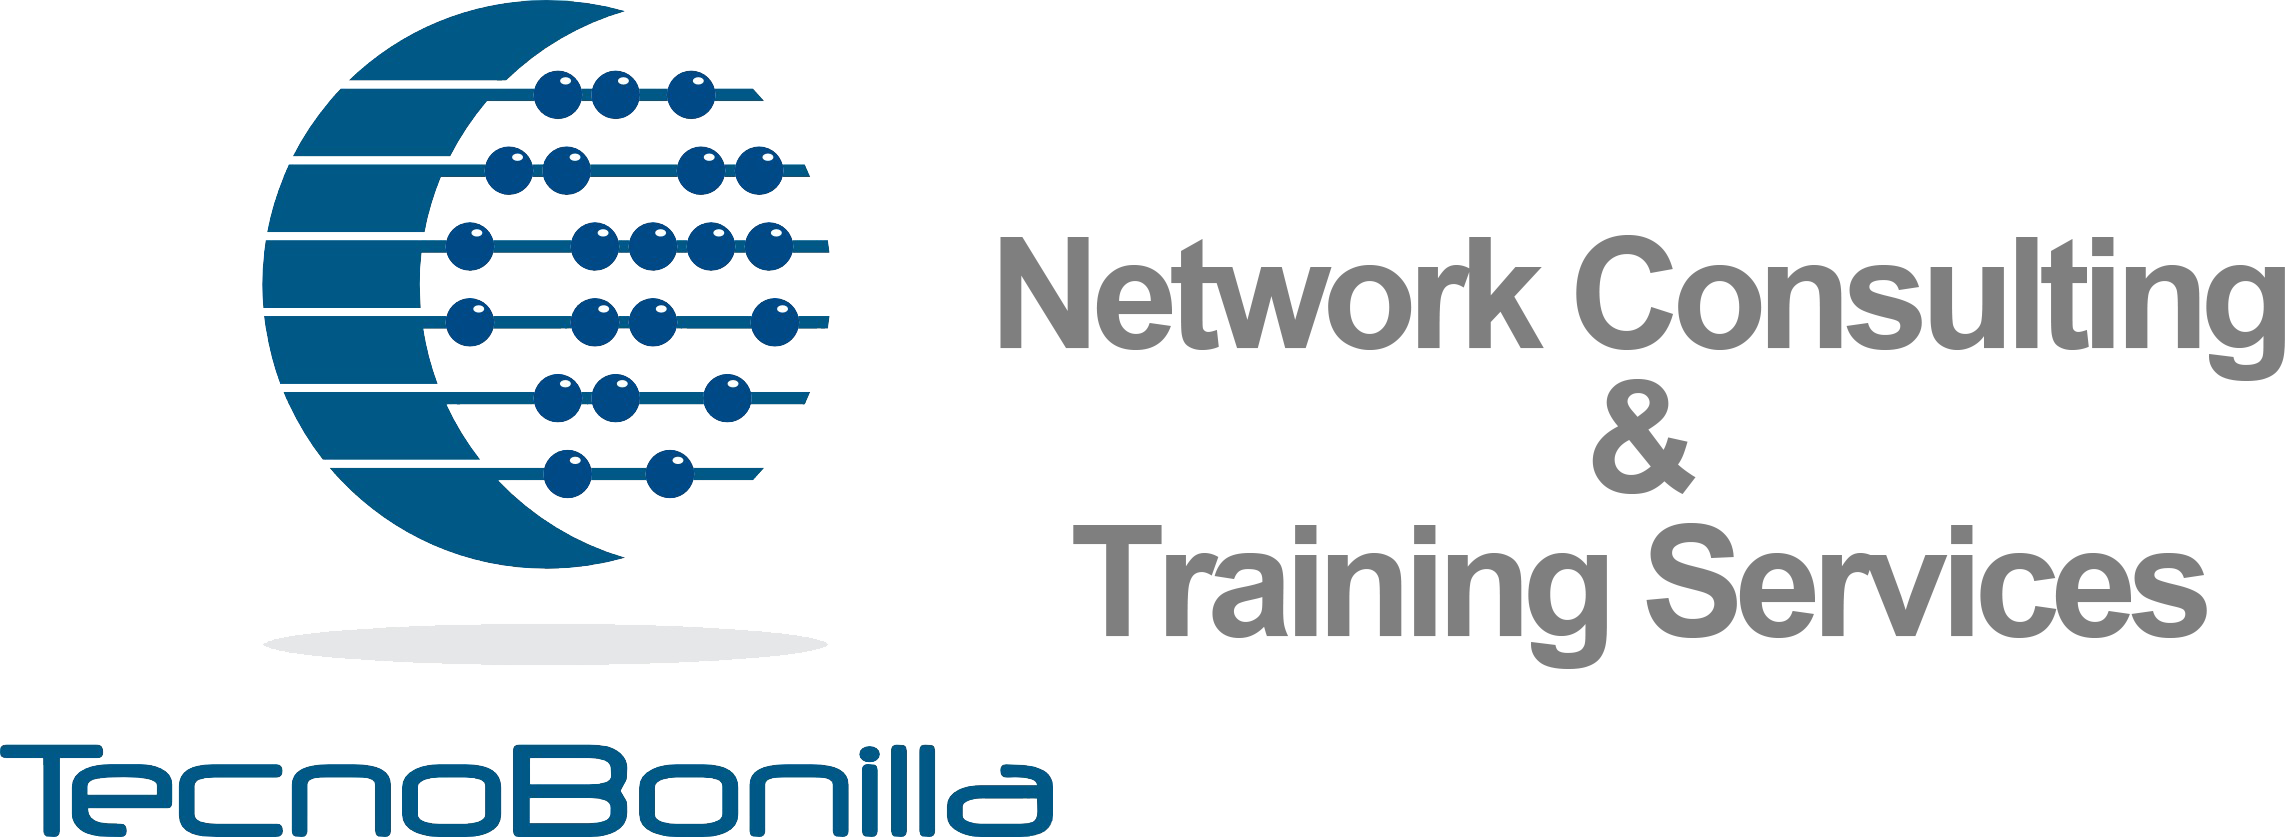 Network Consulting & Training Services